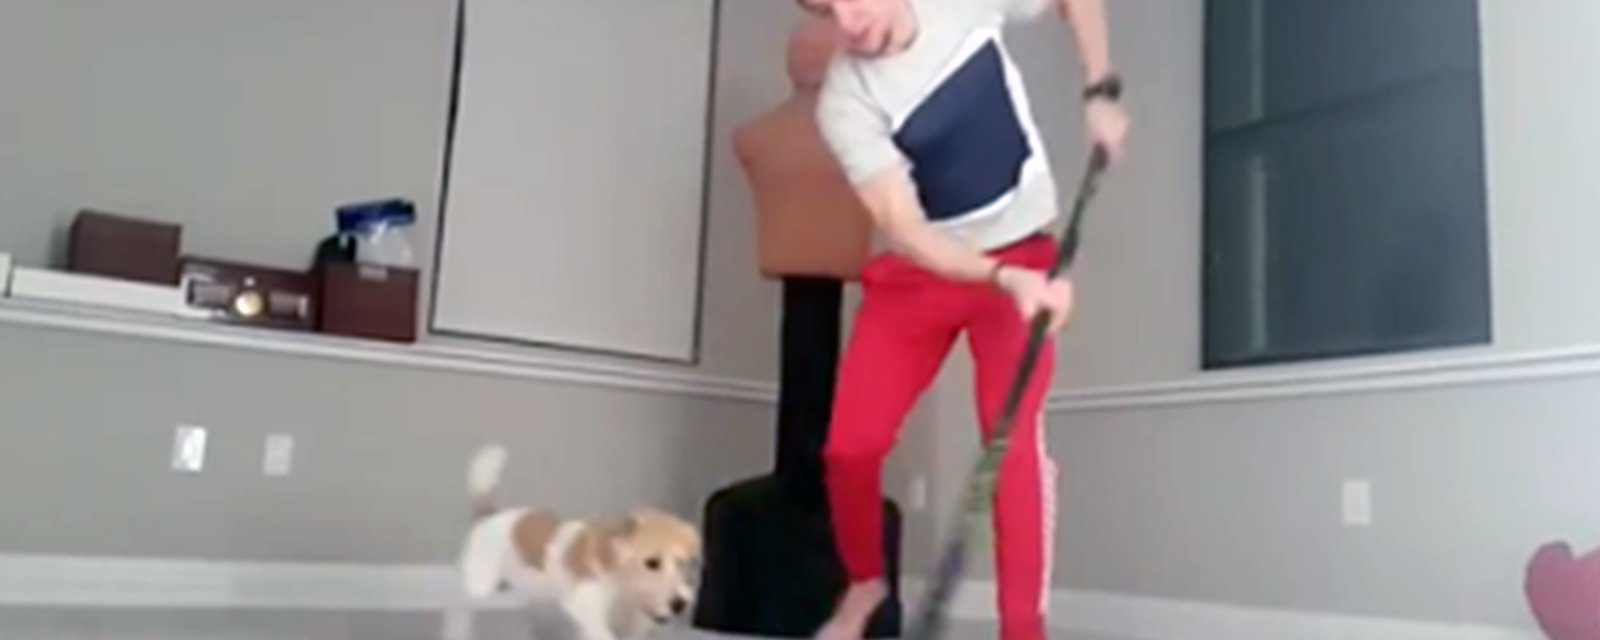 Panarin dangles his dog in preparation for first round playoff series against Lightning